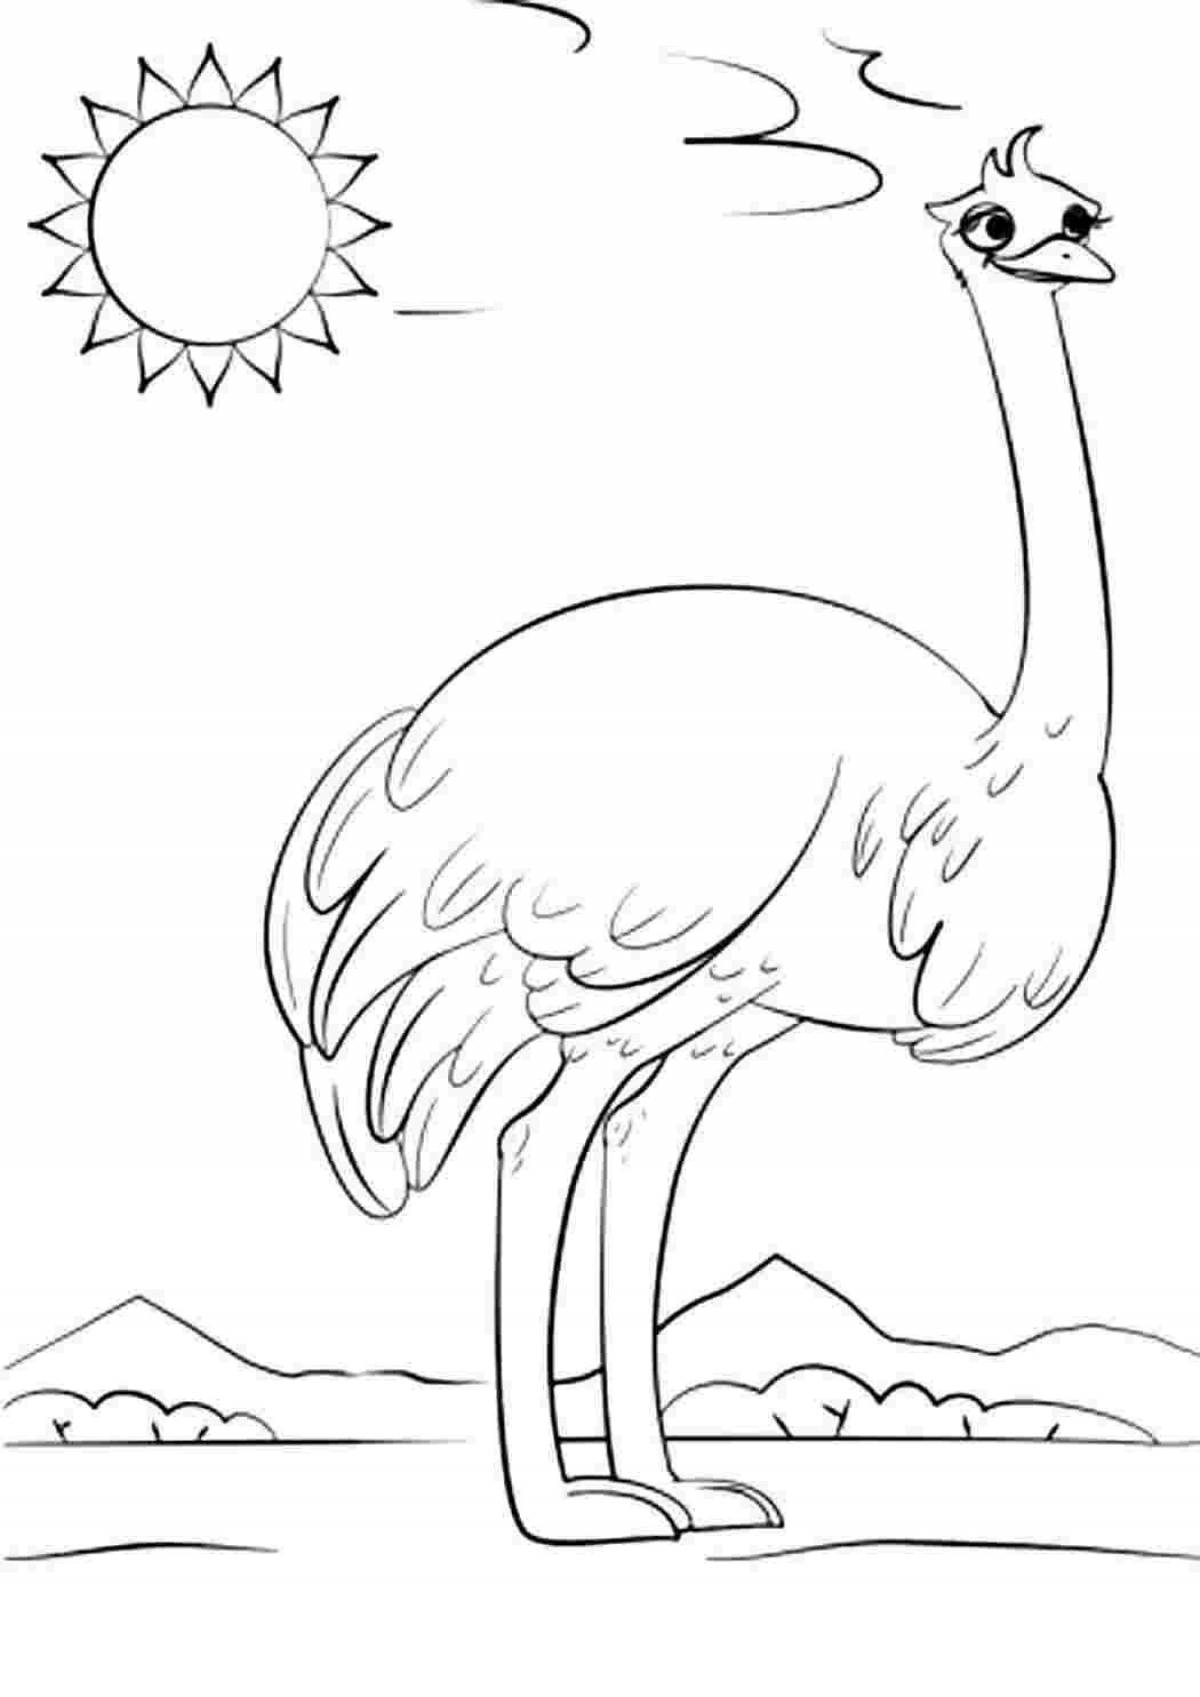 Live ostrich coloring pages for kids